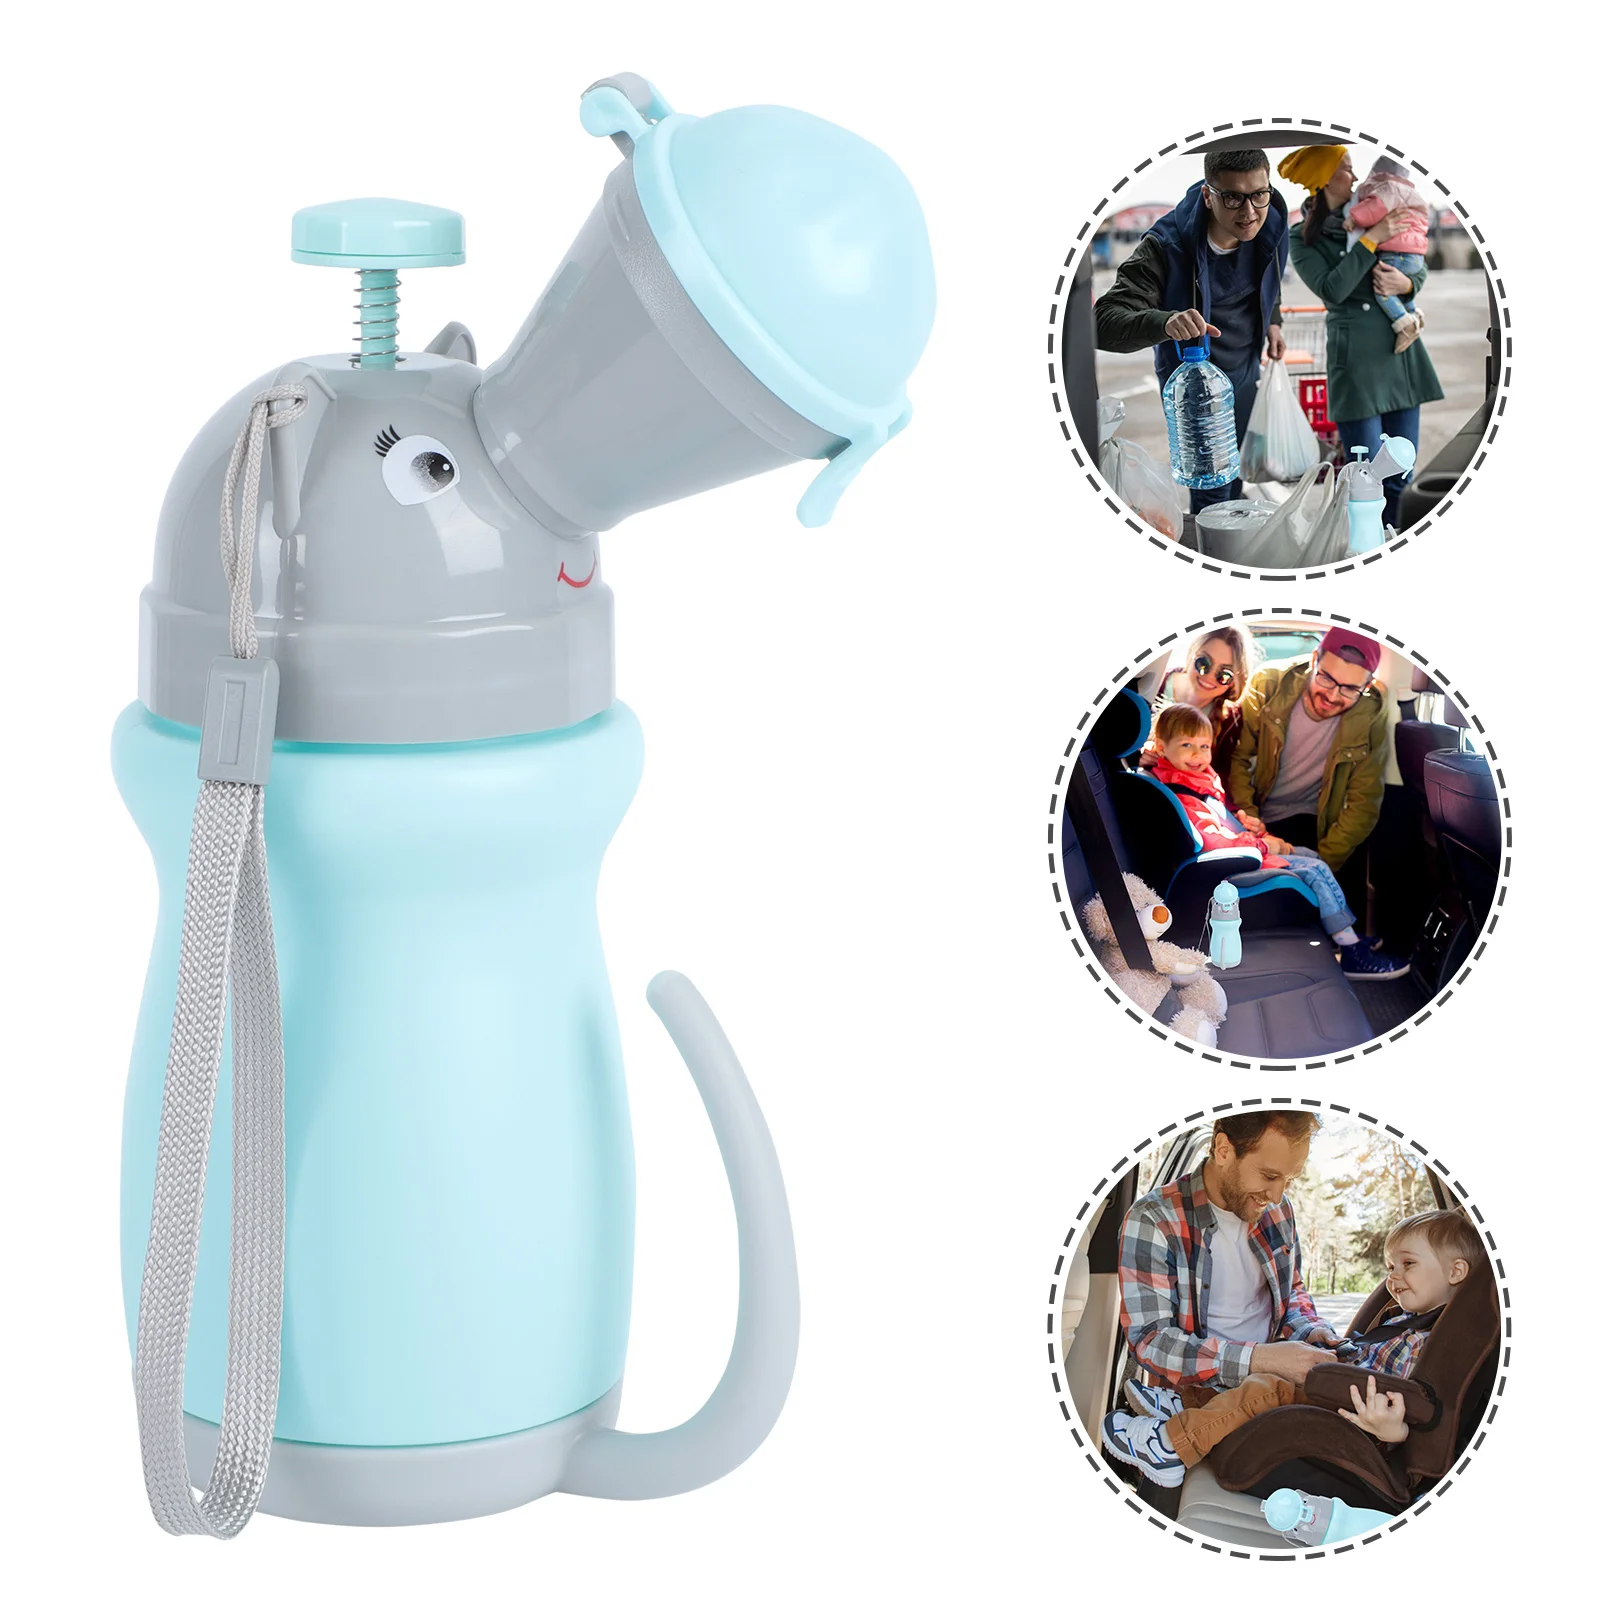 

Urinal Portable Emergency Potty Car Bottle Kids Pee Outdoor Travel Cup Baby Elephant Practical Leakproof Toilet Boys Child